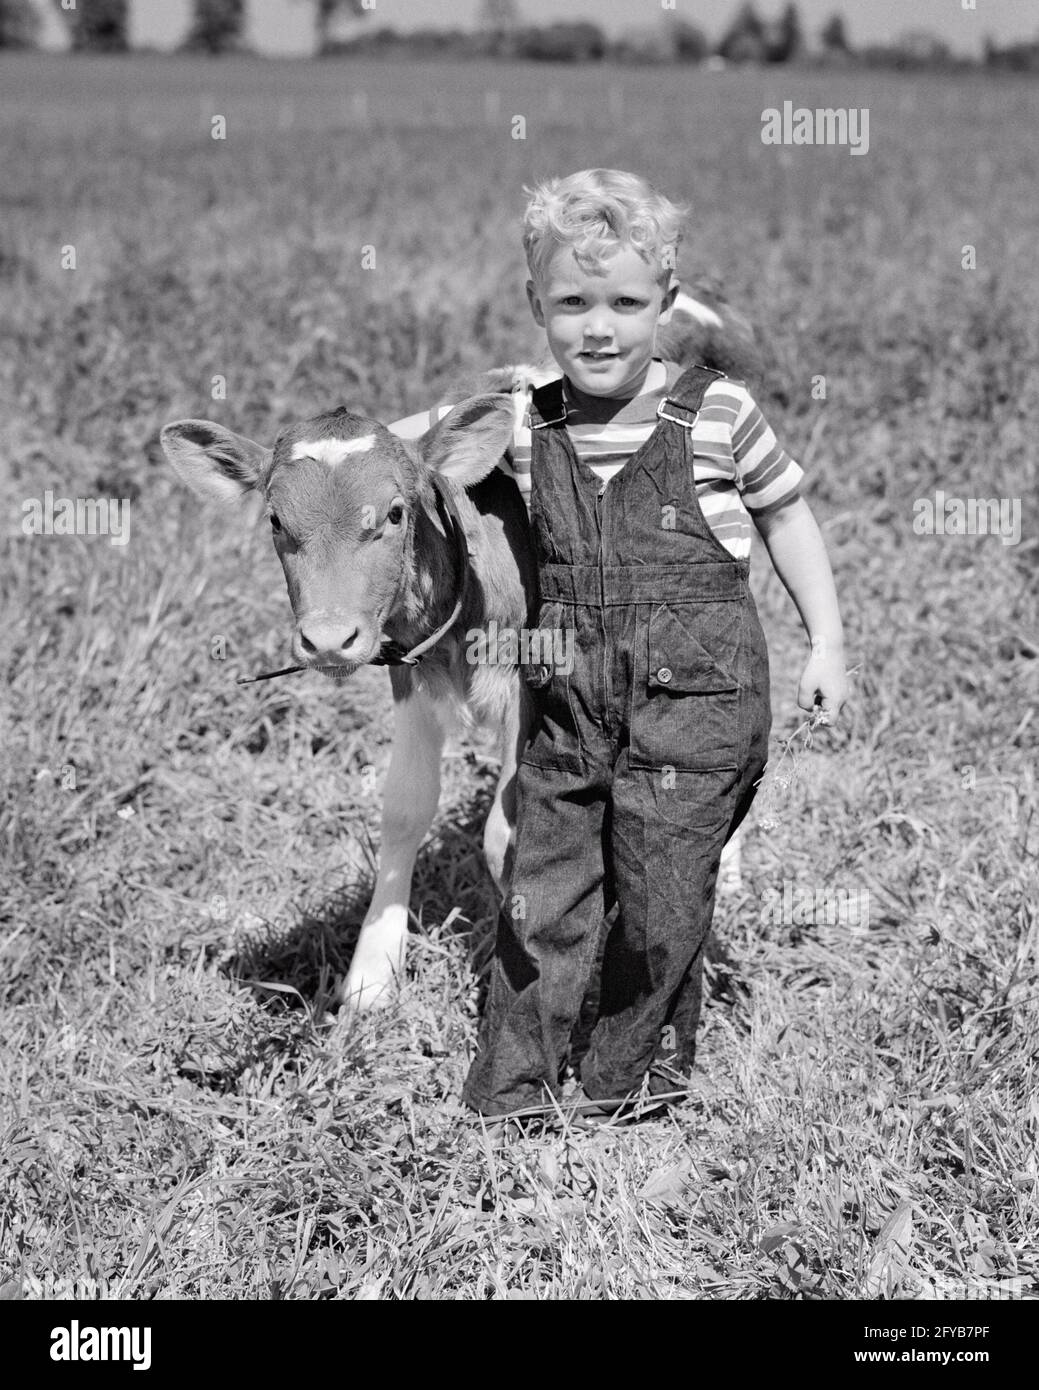 1940s 1950s BLONDE BOY LEADING JERSEY CALF ON DAIRY FARM MARLTON NEW JERSEY USA - c1648 HAR001 HARS PETS CALF CONFIDENCE AGRICULTURE B&W EYE CONTACT CATTLE HAPPINESS ANIMAL BABIES ADVENTURE FARMERS FARMS COWS PRIDE BABY ANIMAL CONNECTION BOVINE NEW JERSEY PLEASANT AGREEABLE CHARMING GROWTH JUVENILES LOVABLE MAMMAL PLEASING TOGETHERNESS ADORABLE APPEALING BLACK AND WHITE CALVES CAUCASIAN ETHNICITY DOMESTICATED HAR001 LIVESTOCK OLD FASHIONED Stock Photo